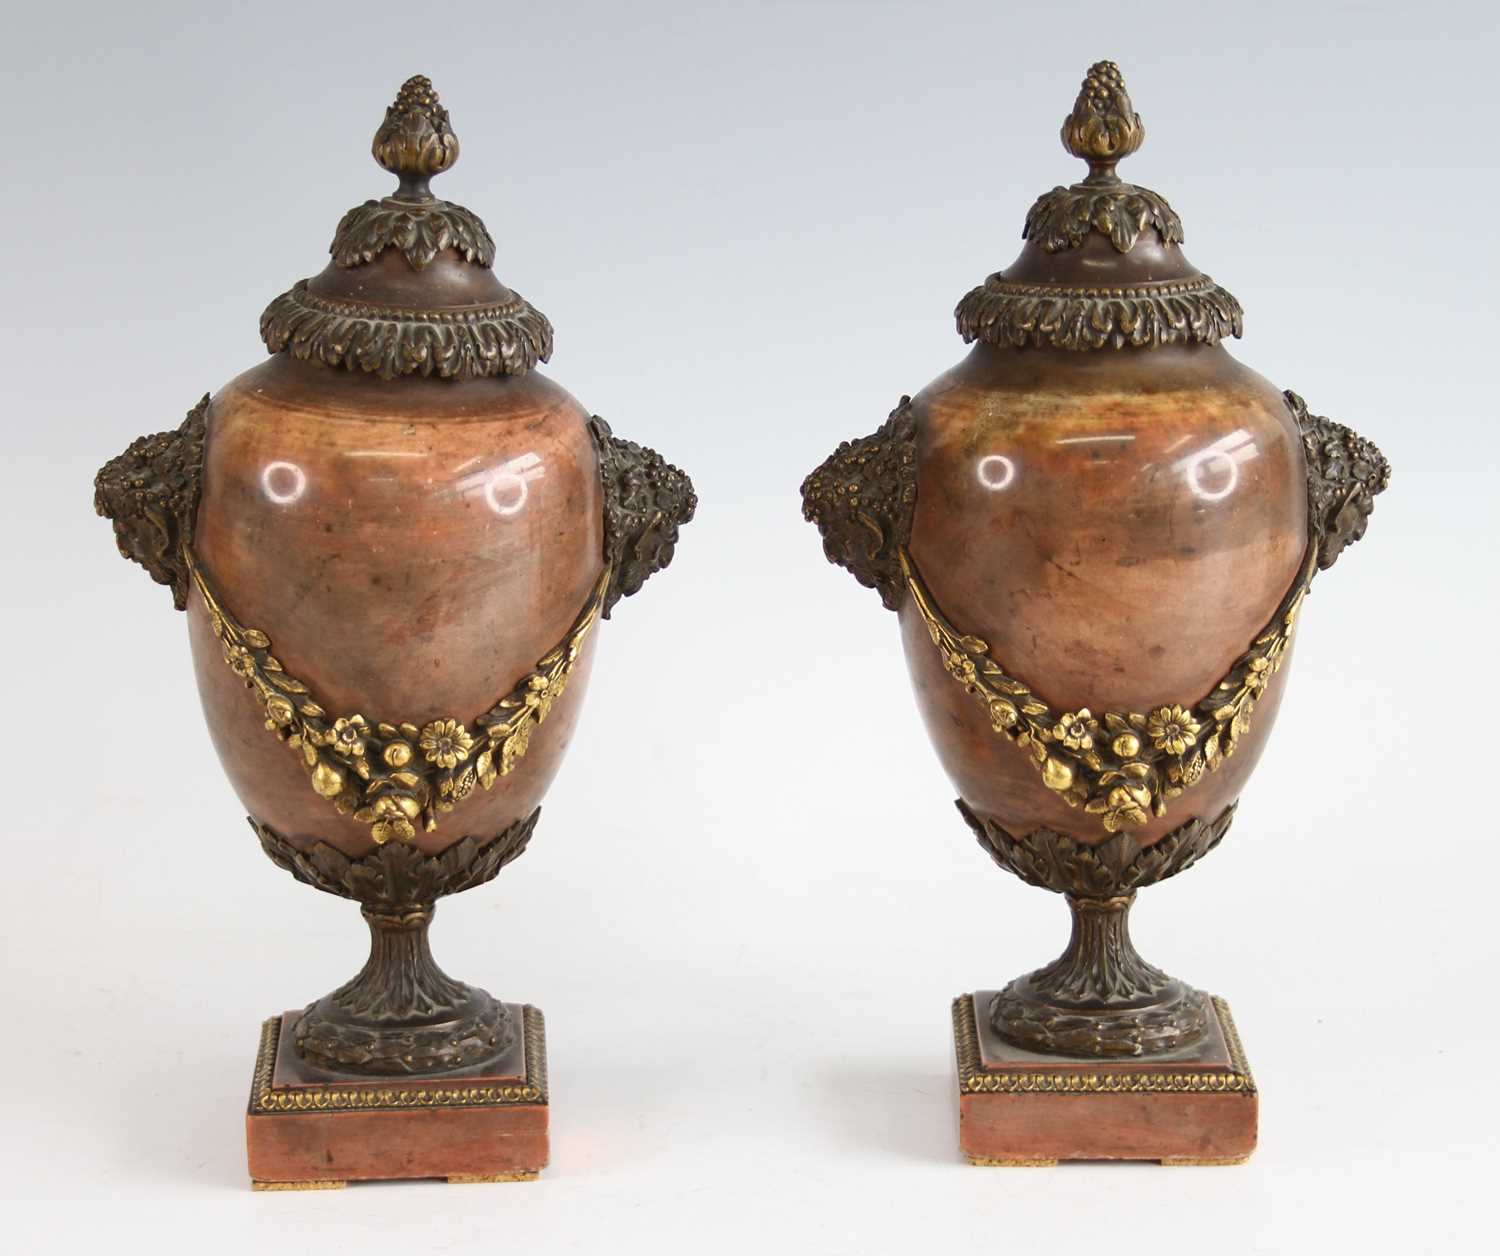 A pair of mid-19th century Jasper and gilt bronze mounted pedestal urns, having finial topped